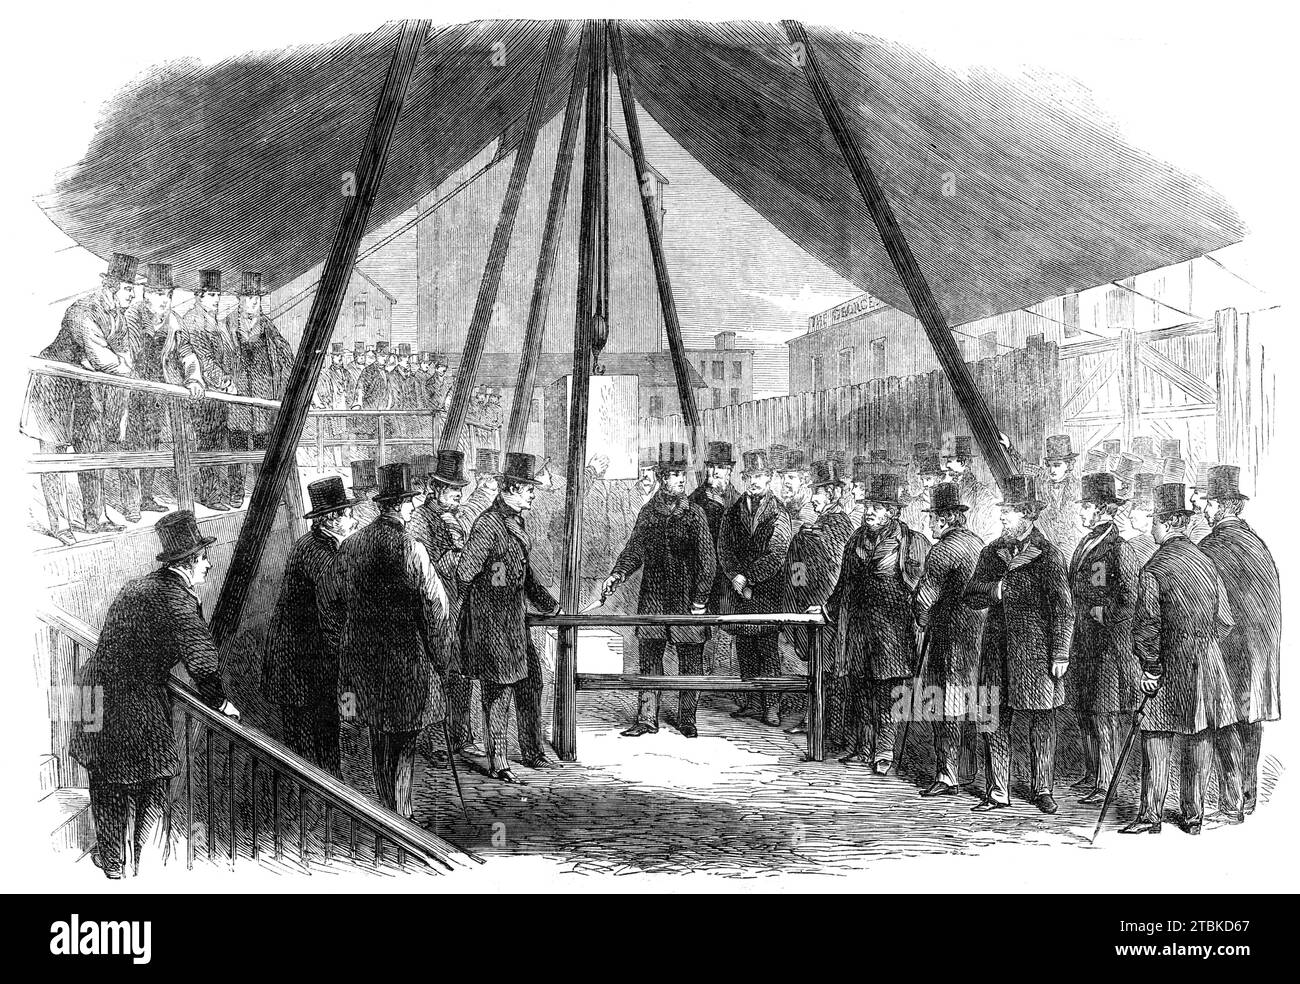 Lord Berners laying the foundation-stone of the Agricultural Hall, Islington, [London], 1861. The building would '...take the place of the Baker-street Bazaar for the Christmas exhibition of the Smithfield Cattle Club, and for meetings and other purposes connected with the promotion of agricultural improvement... The building will occupy an extensive area in Liverpool-road, but a few hundred yards from the Angel at Islington. Its capacity will be very much greater than that of the Baker-street Bazaar, and it will contain the most ample accommodation for the exhibition of cattle, sheep, hogs, a Stock Photo